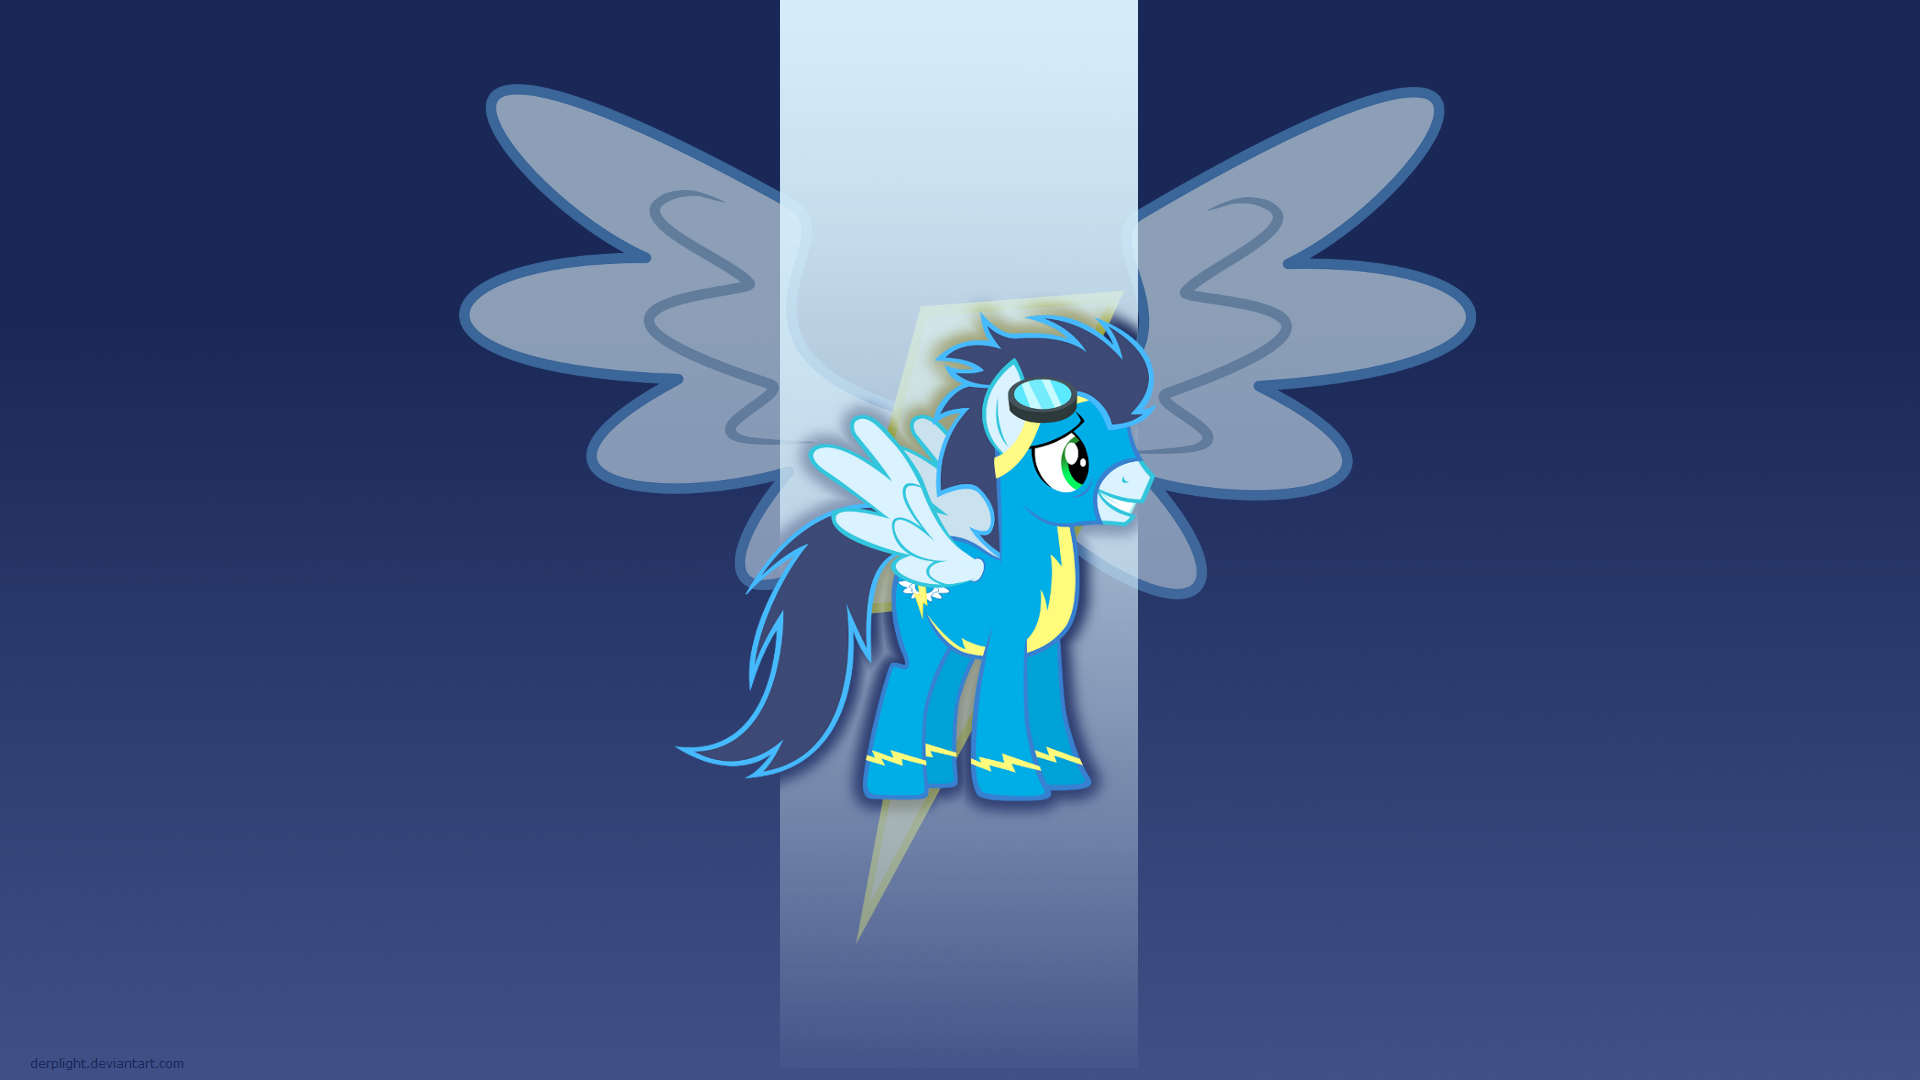 Soarin' Wallpaper by Blackm3sh, DerpLight and The-Smiling-Pony